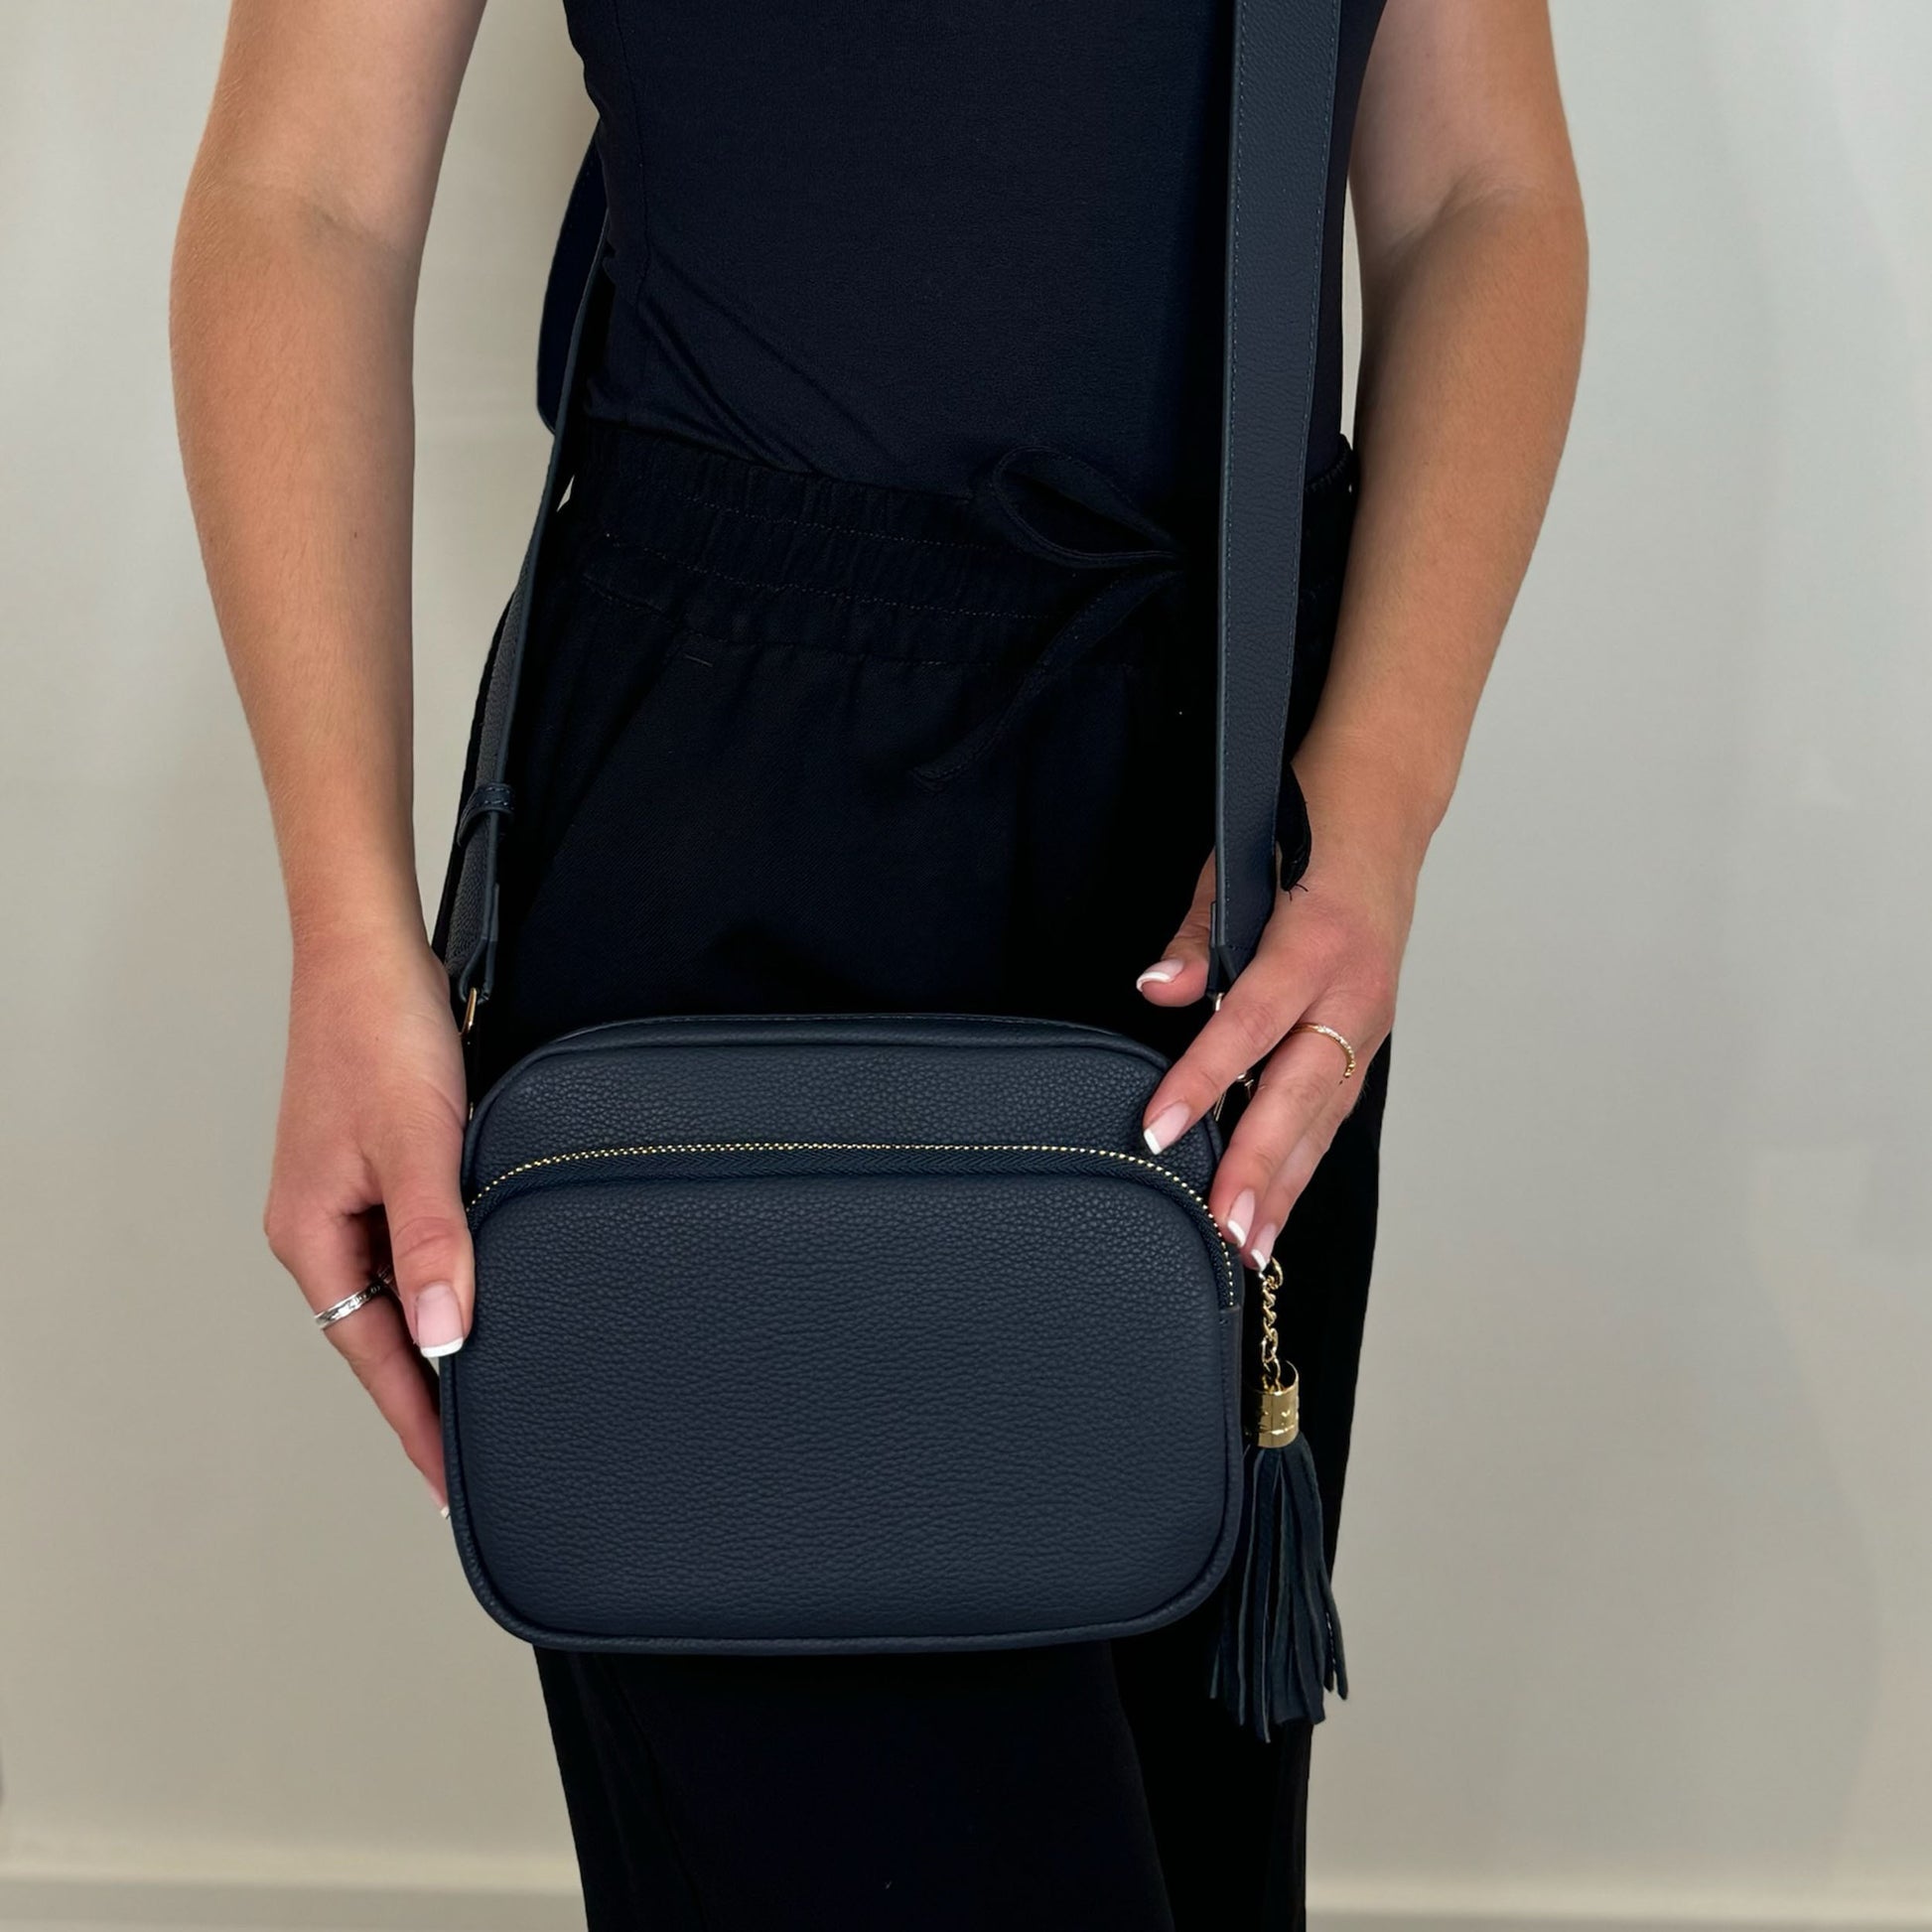 Dark Navy  Swoon London Downton Bag on Person